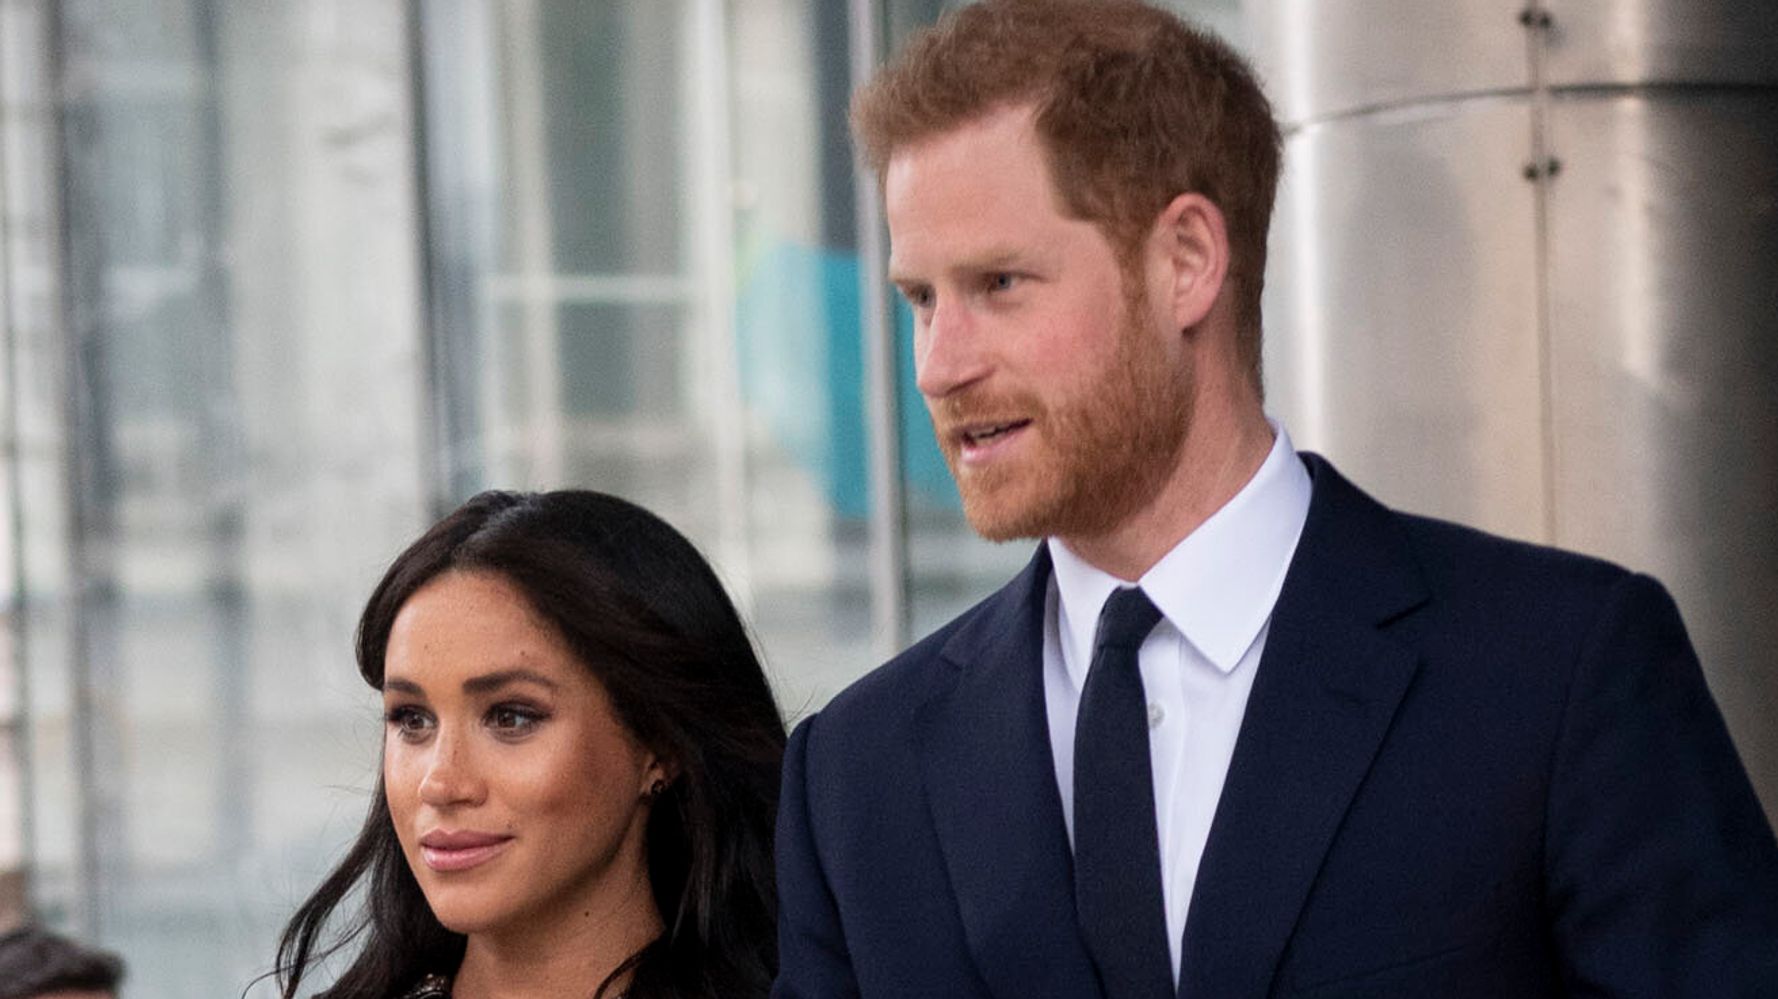 Meghan Markle and Prince Harry pay tribute to Prince Philip: ‘You will be greatly missed’